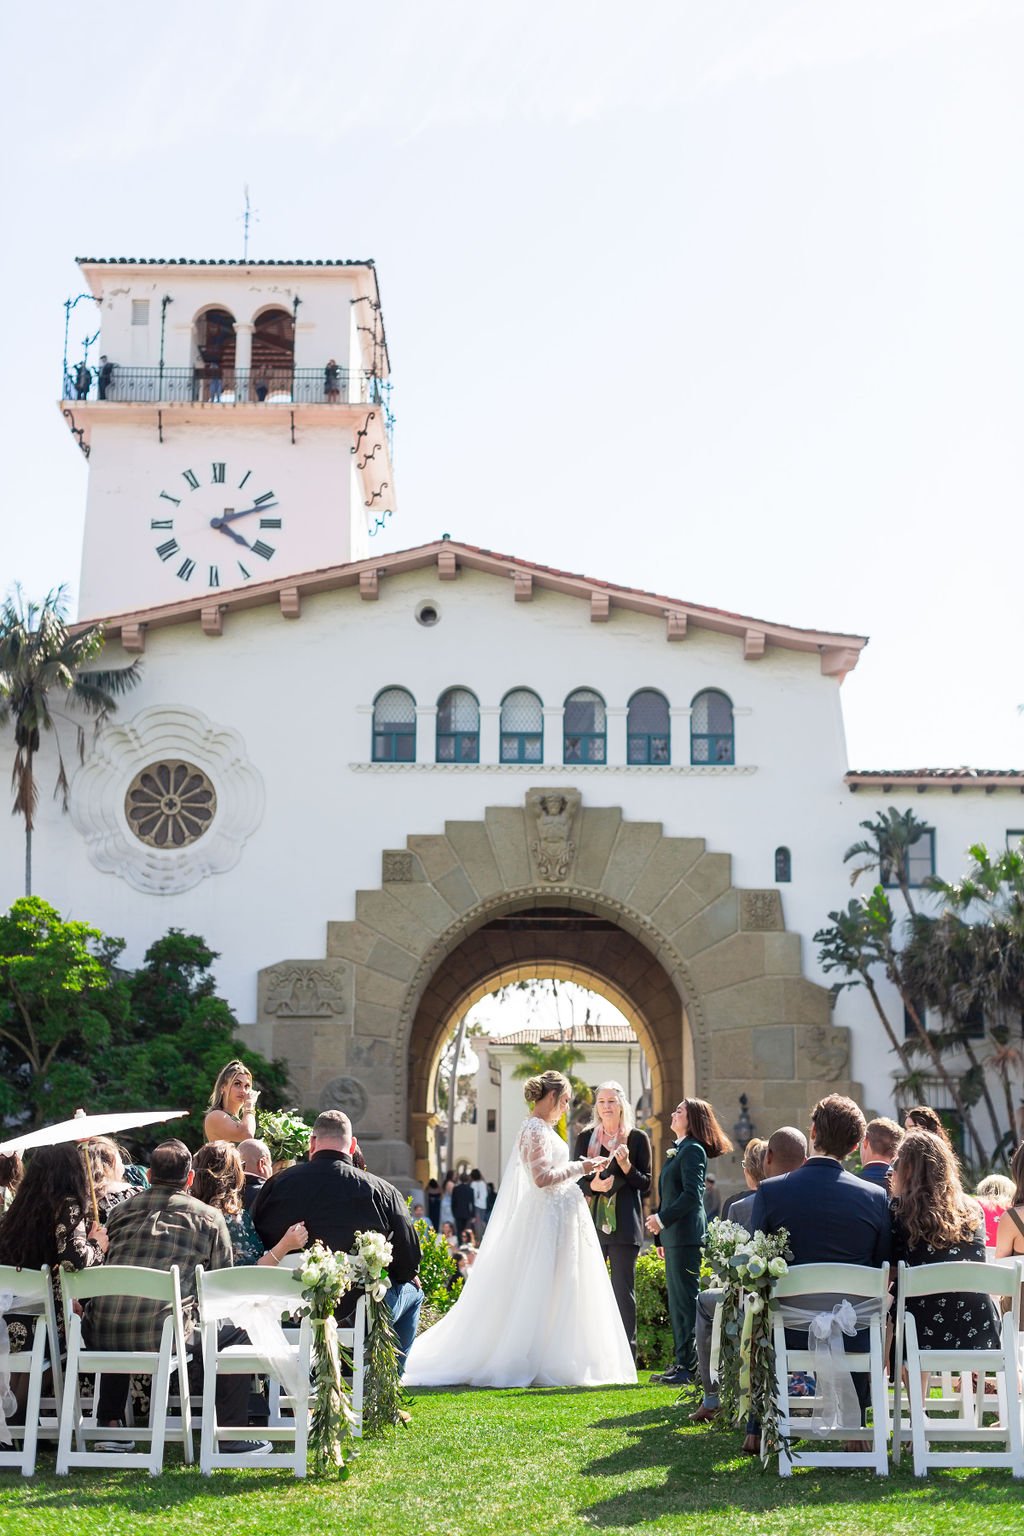 www.santabarbarawedding.com | Weddings by the Sea | Santa Barbara Courthouse | Kevin Qian | Cate Forest Designs | Jen Simone | Wendy Brewer | The Ceremony 